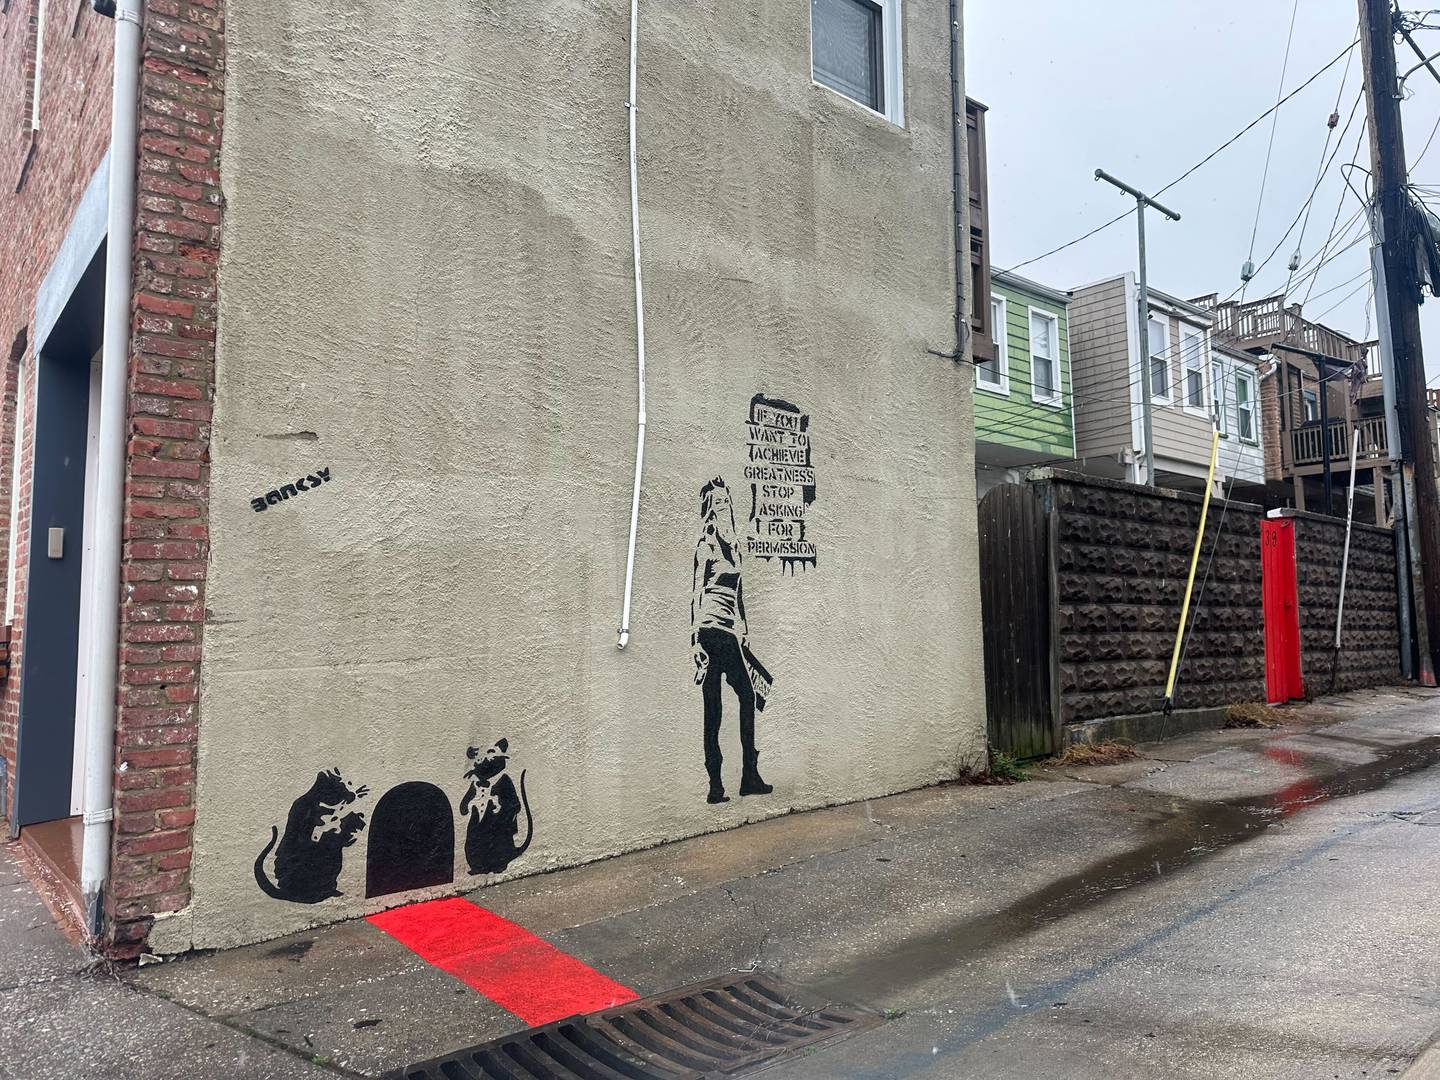 Graffiti in an alley off Fait Avenue near S. Potomac Street in Canton looks like it could be done by the artist Banksy. But both images are recreations of existing pieces.